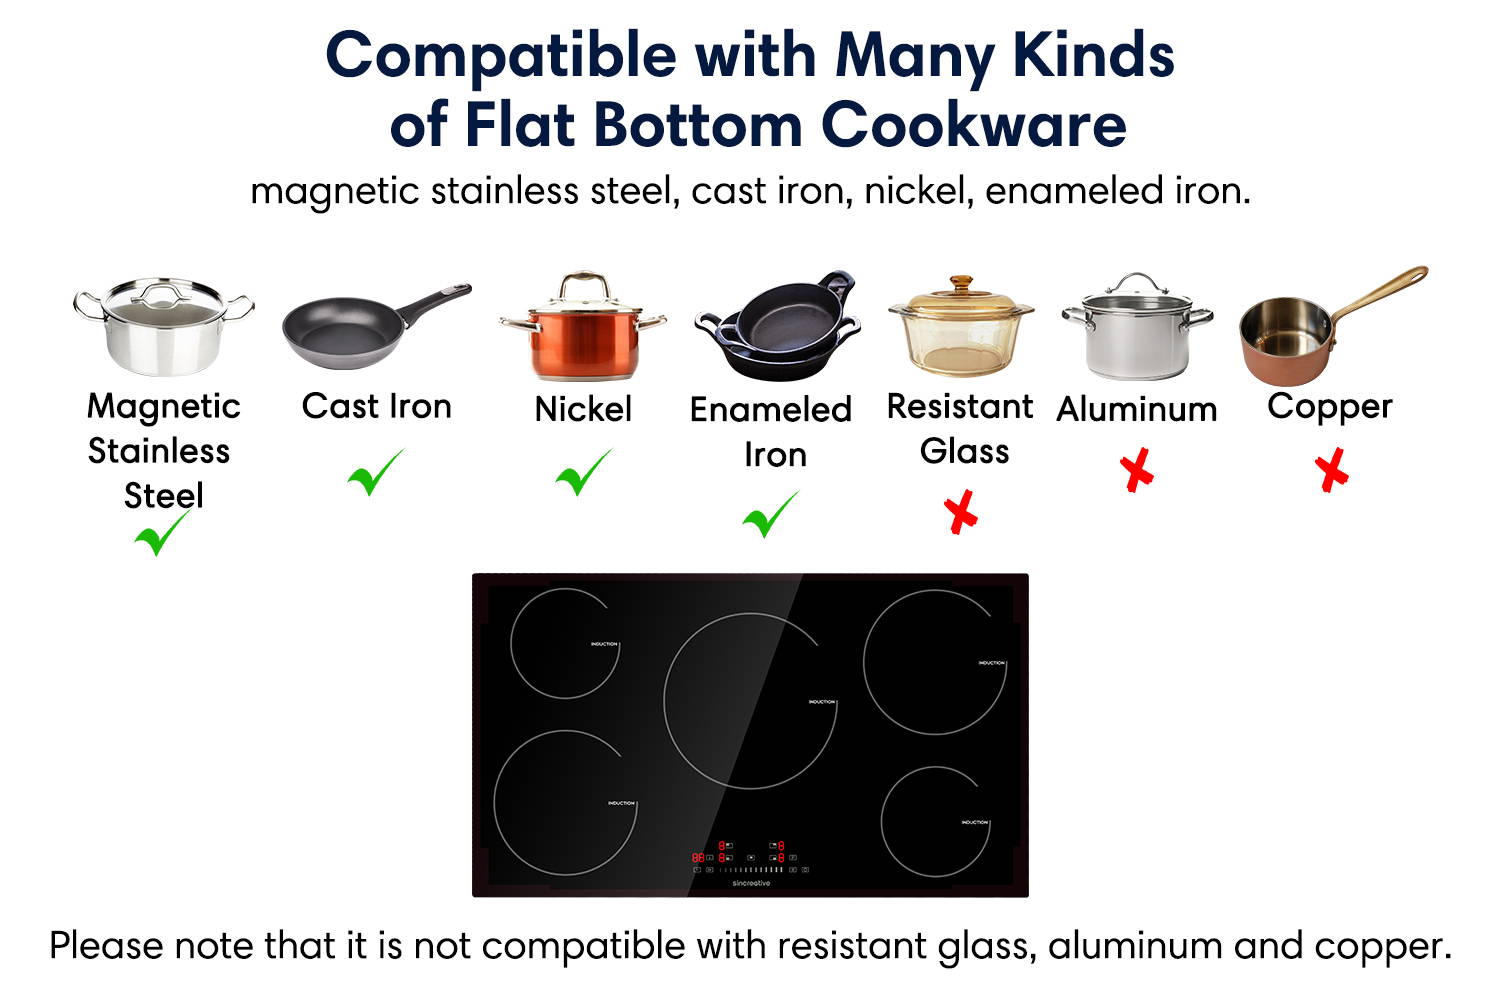 Compatible with Many Kinds of Flat Bottom Cookware magnetic stainless steel, cast iron, nickel, enameled iron. Please note compatible with resistant glass, aluminum and copper.